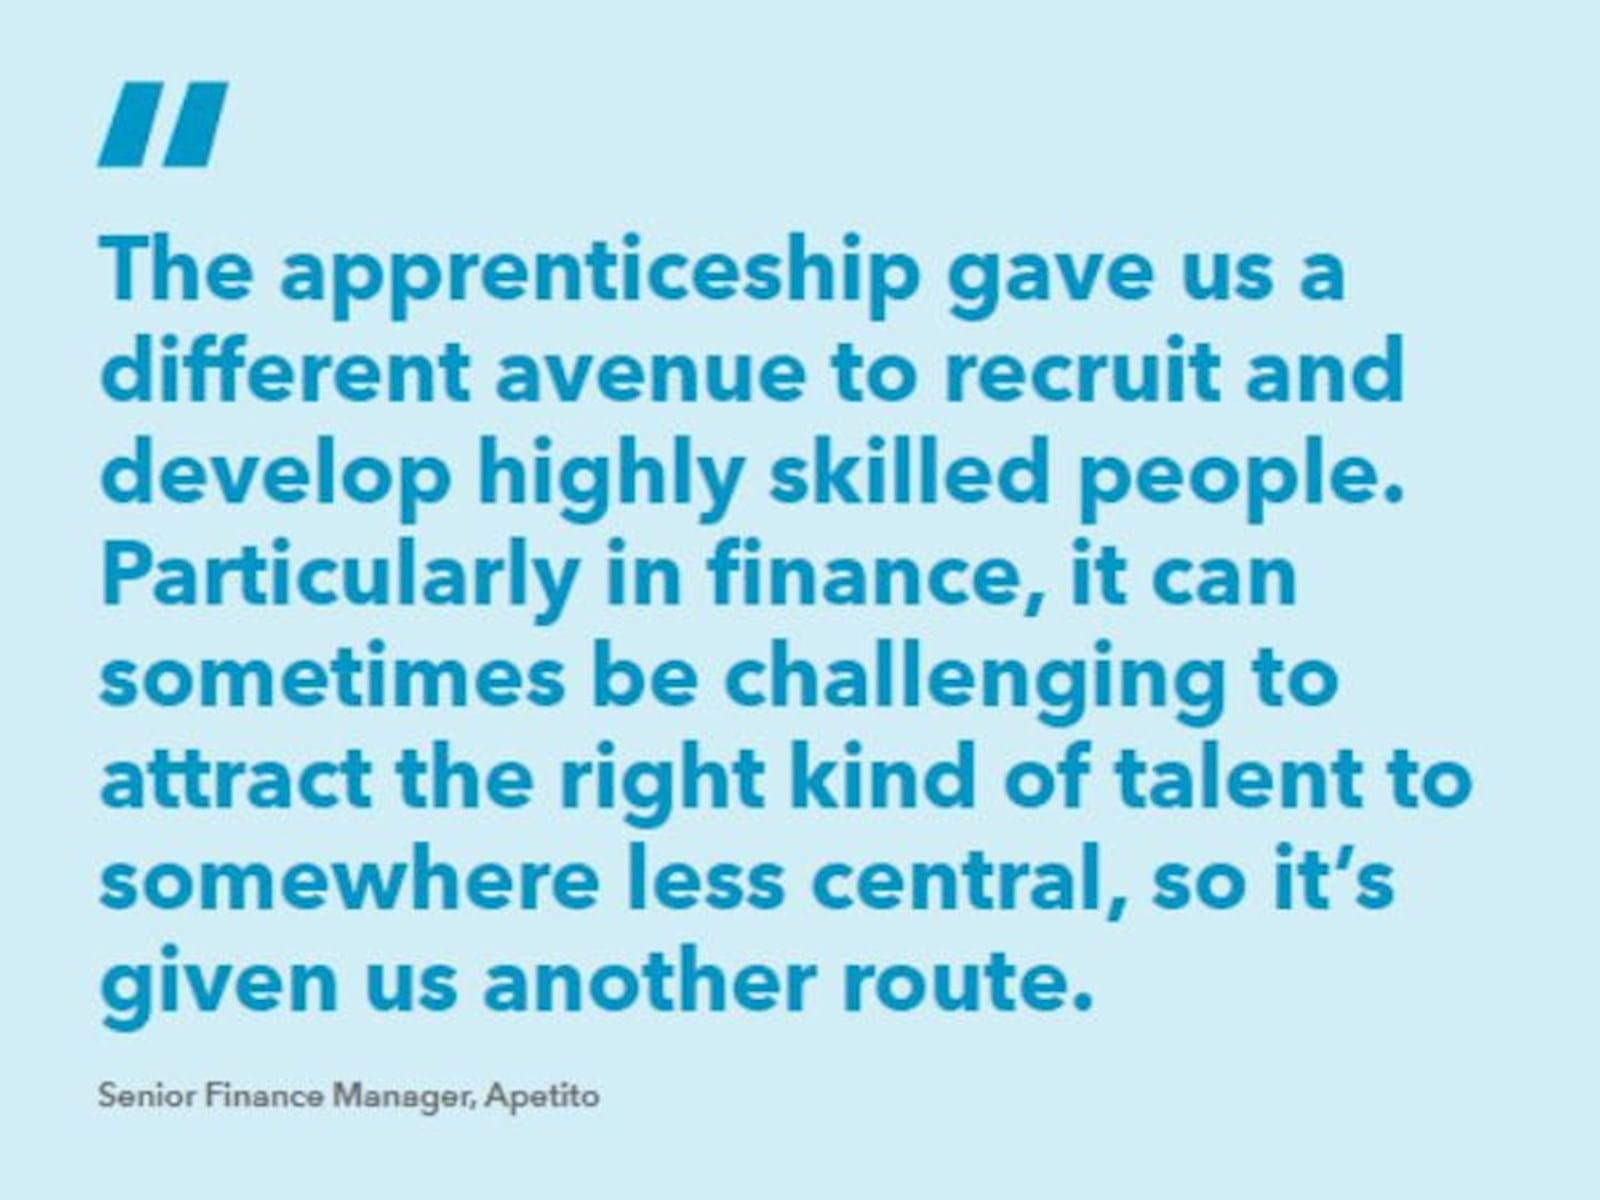 Quote from Apetito: “The apprenticeship gave us a different avenue to recruit and develop highly skilled people. Particularly in finance, it can sometimes be challenging to attract the right kind of talent to somewhere less central, so it’s given us another route.” 